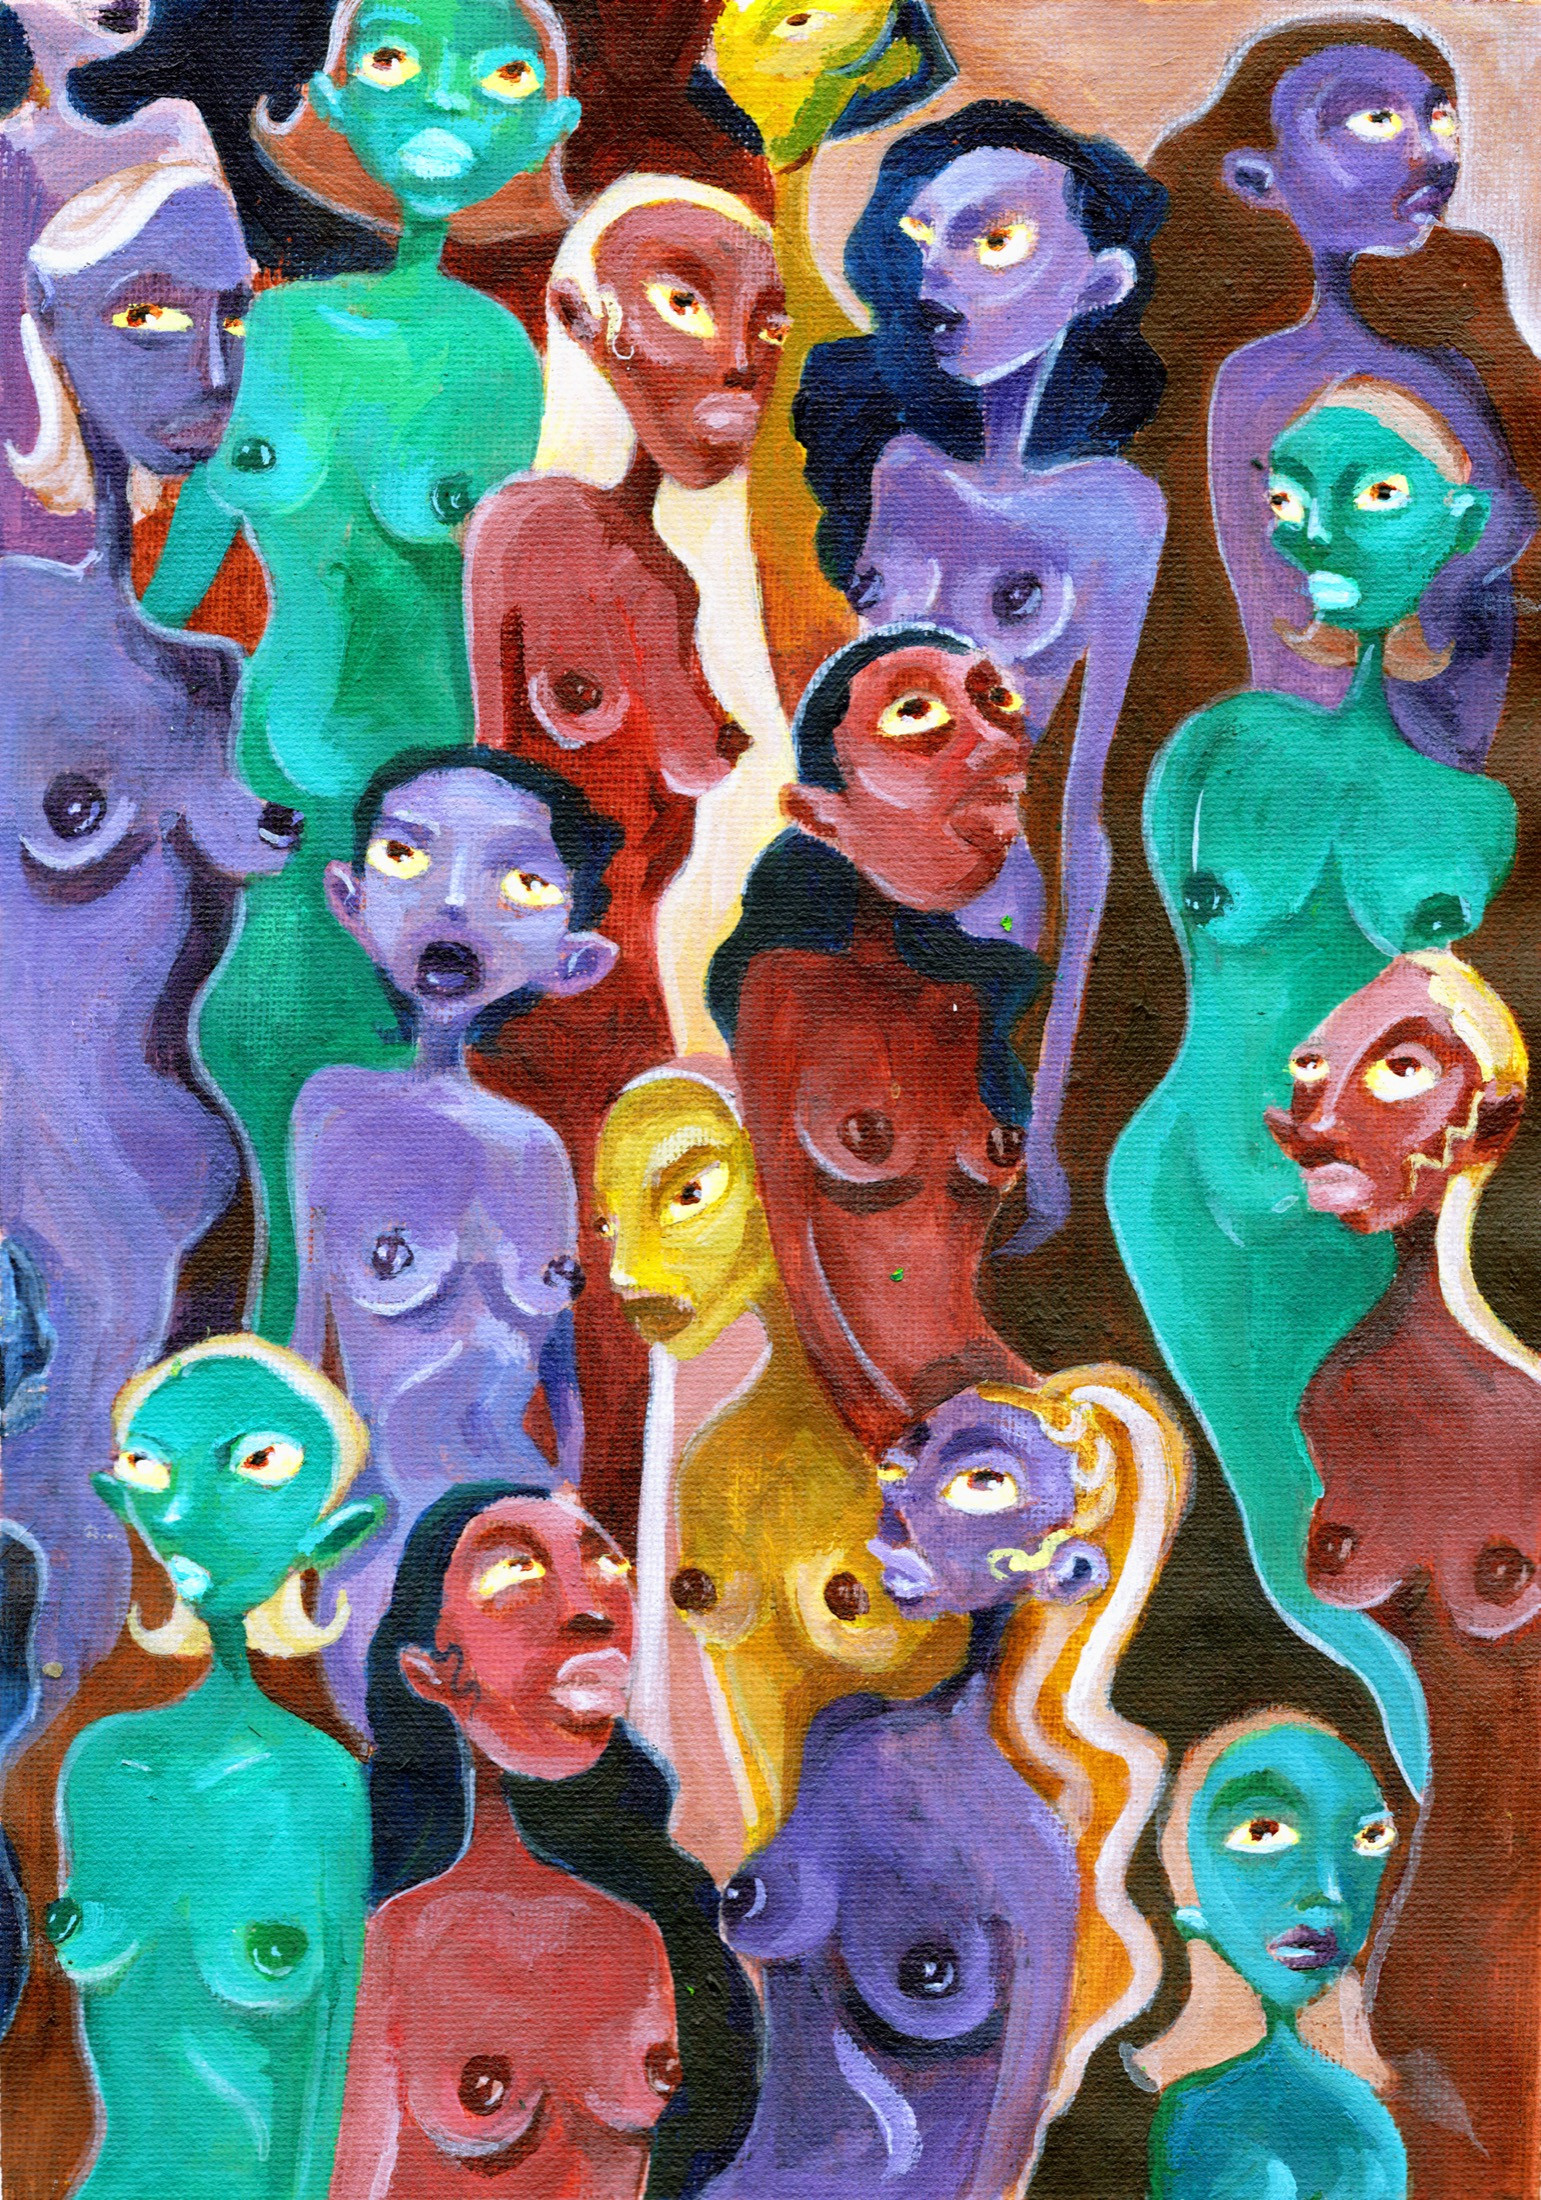 The image shows a repeating pattern of nude women of a variety of colours (burgundy, teal, purple, yellow) overlapping and looking directly at the viewer.